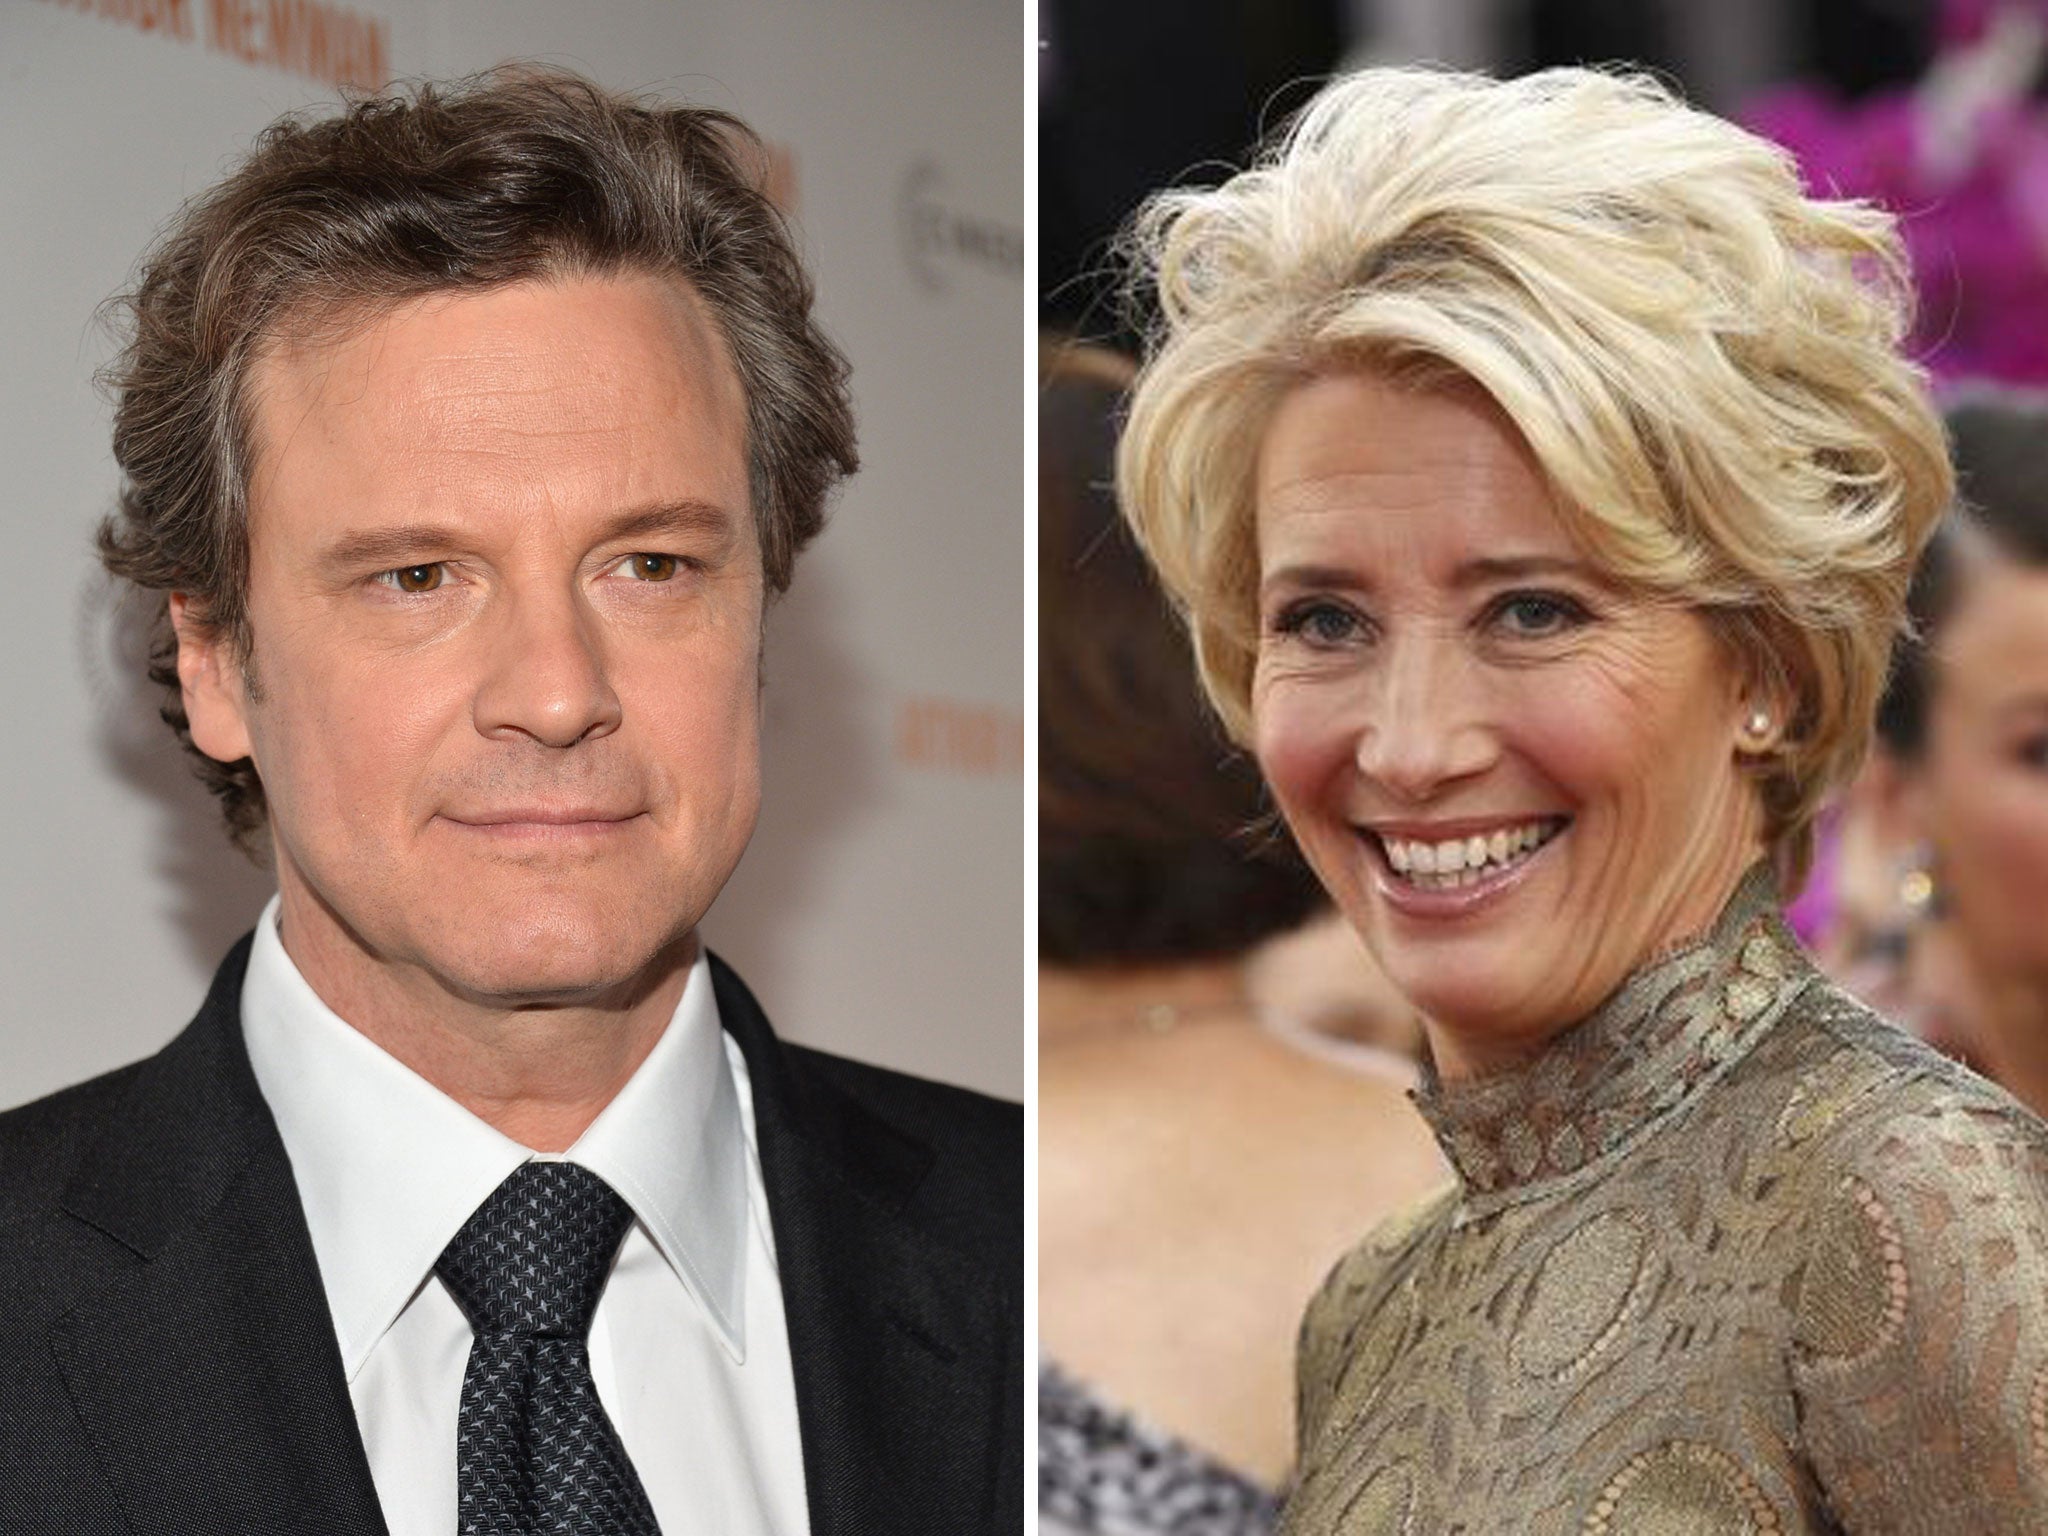 Colin Firth and Emma Thompson, a Refugee Council patron, have called for the UK to offer a safe haven to Syrian refugees